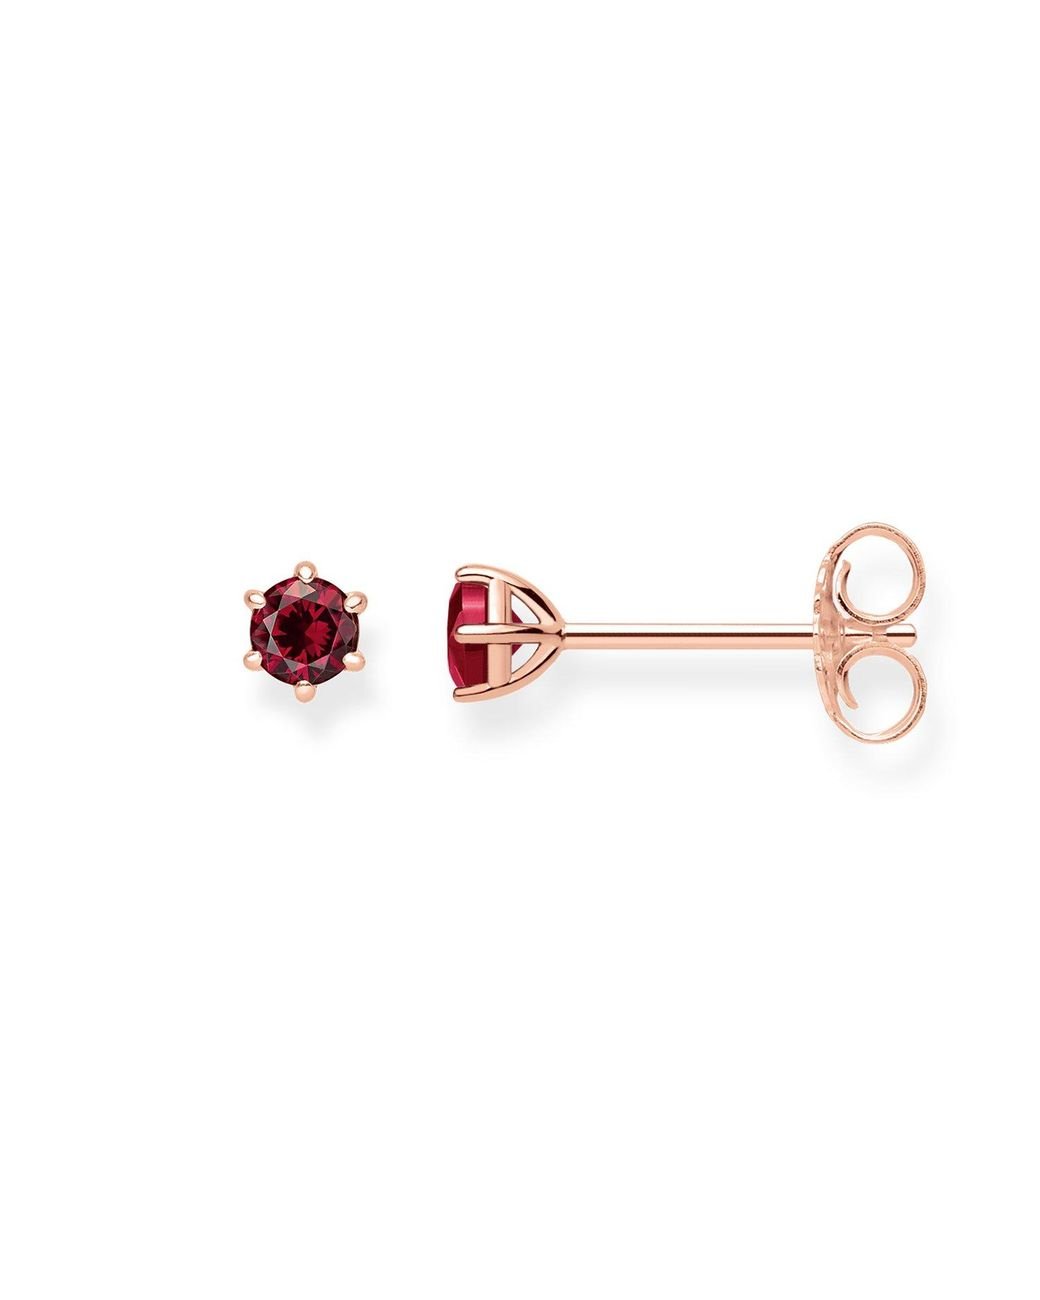 Thomas Sabo Ohrstecker Roter Stein 925 Sterling Silber 750 Roségold  H1964-540-10 in Rot | Lyst DE